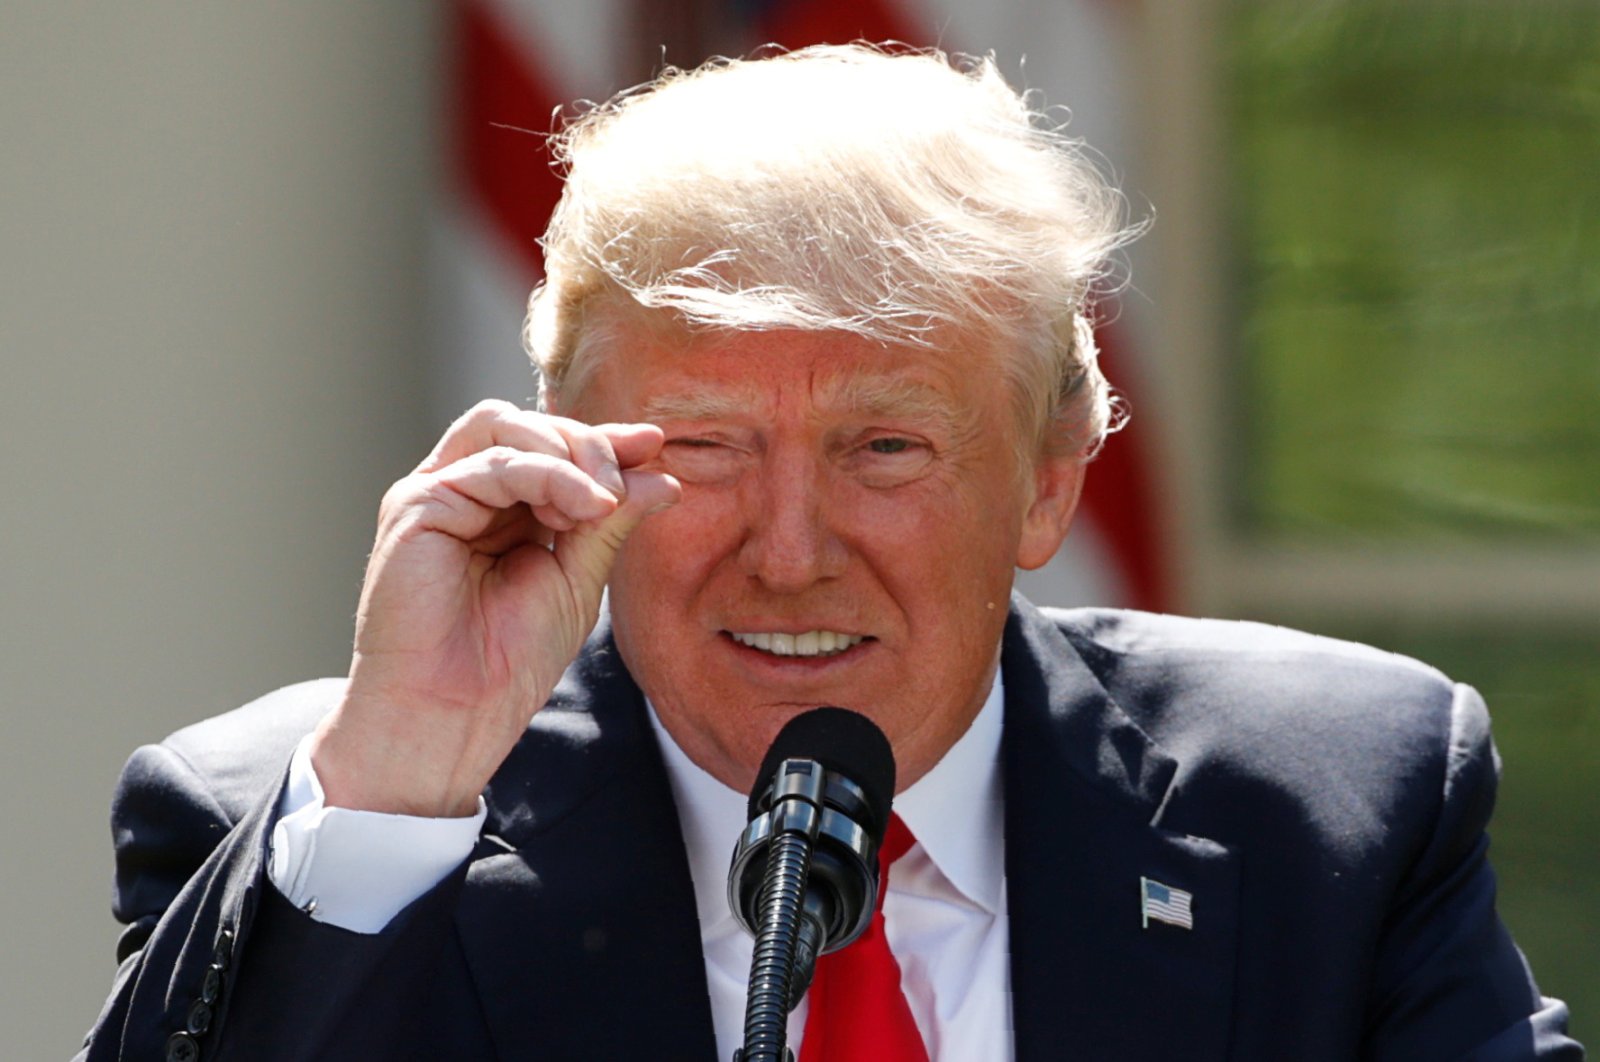 U.S. President Donald Trump refers to amounts of temperature change as he announces his decision that the United States will withdraw from the landmark Paris Climate Agreement, in the Rose Garden of the White House in Washington, U.S., June 1, 2017. (Reuters Photo)